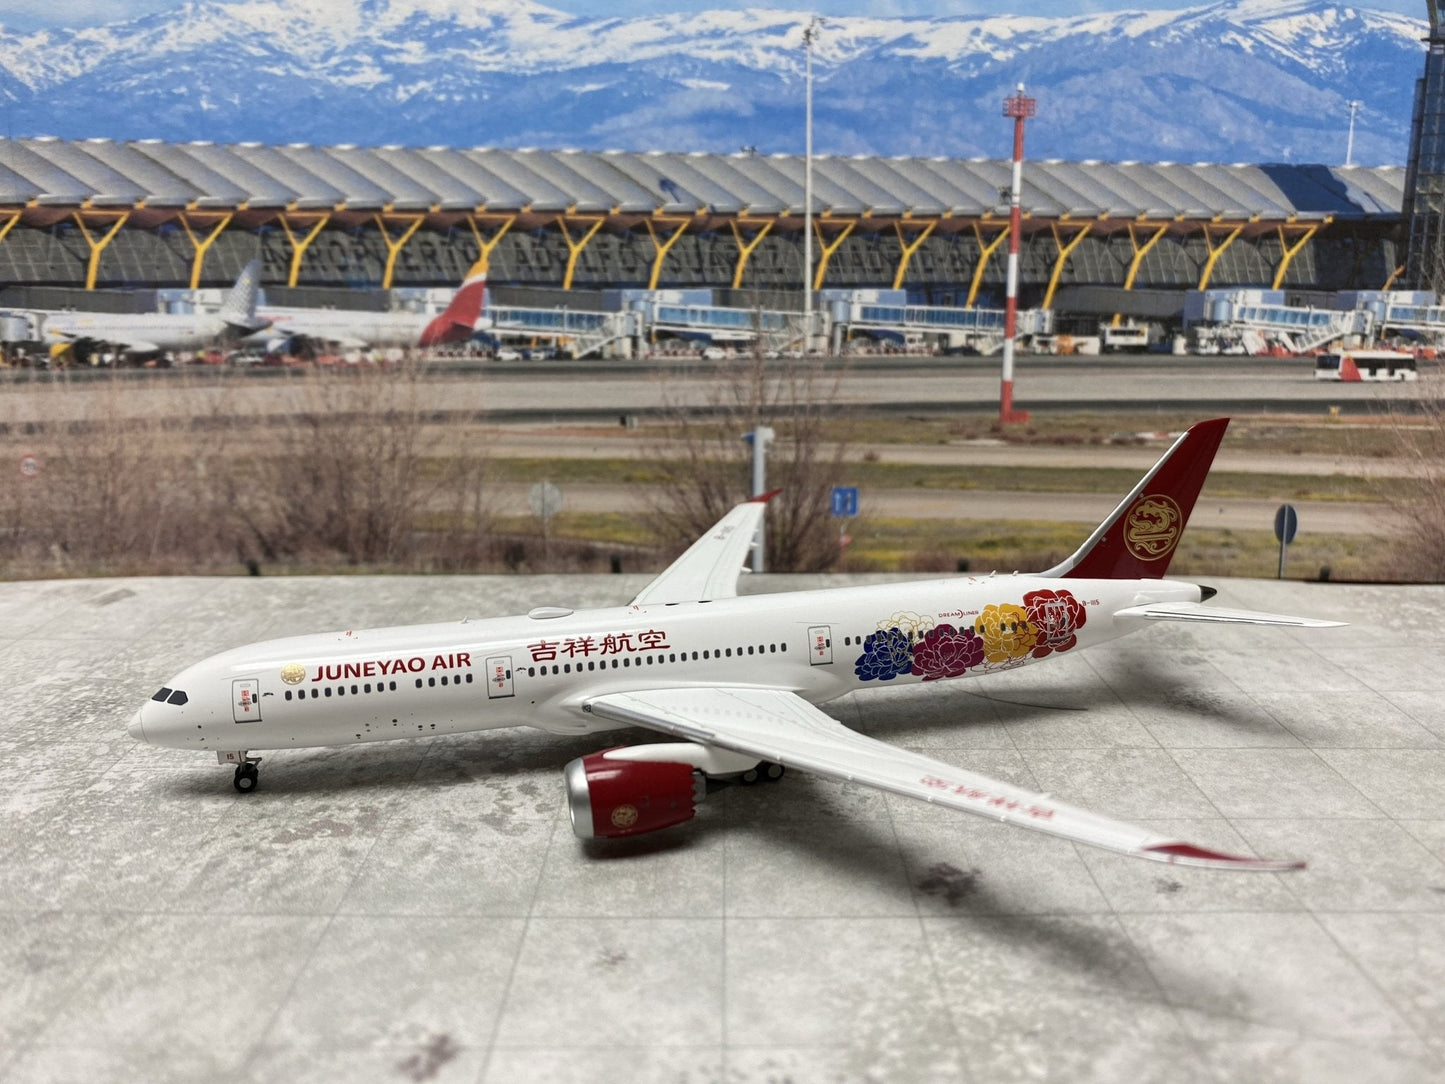 1/400 Juneyao Airlines B 787-9 "Flower" NG Models 55007 - Midwest Model Store